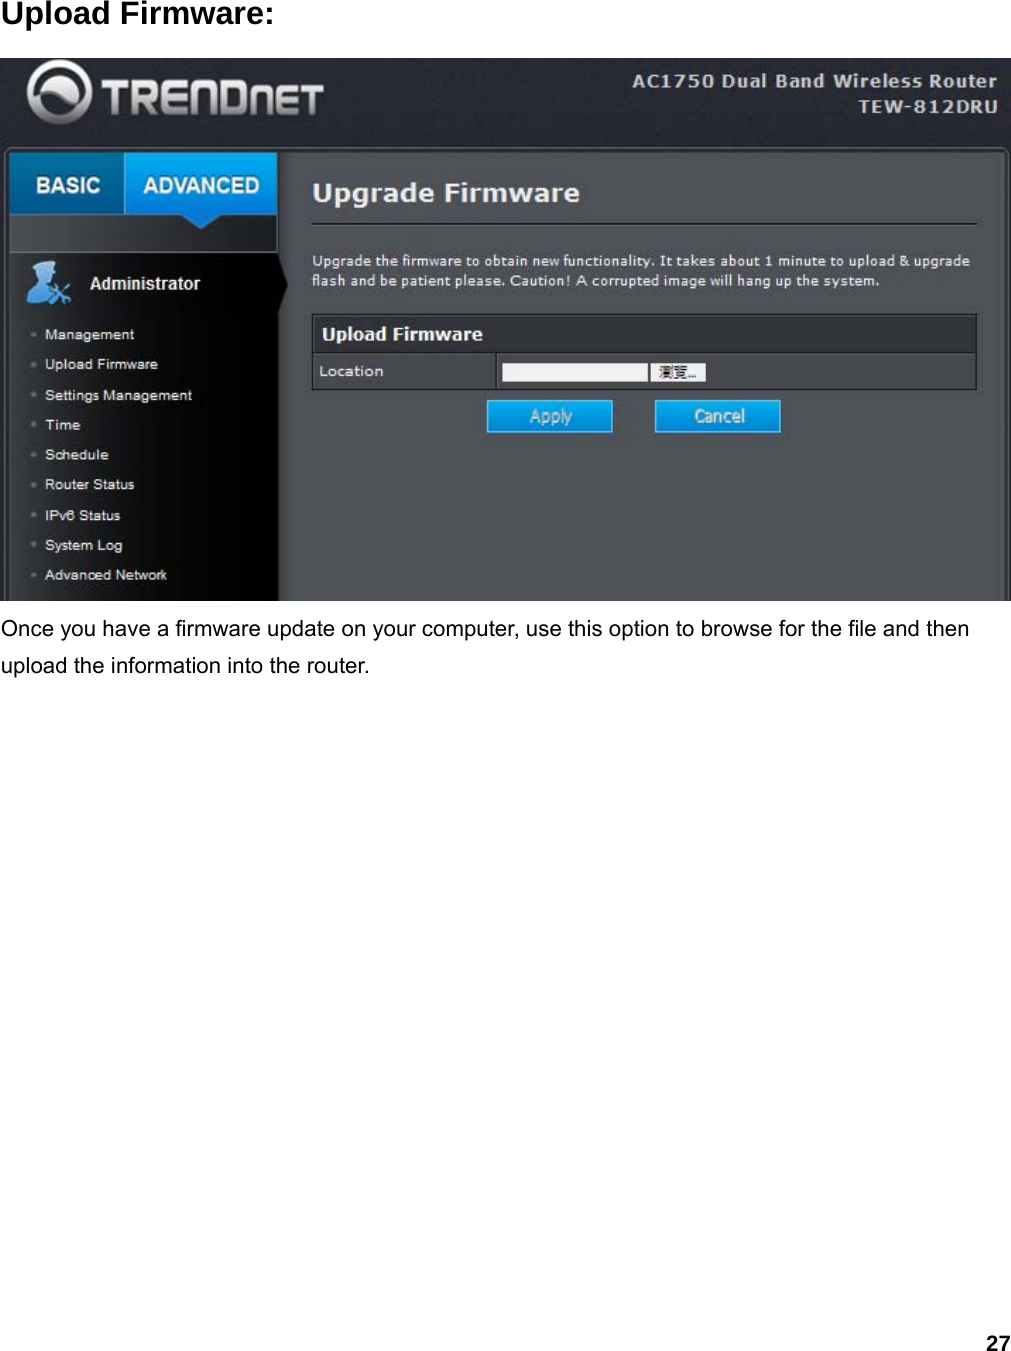 27 Upload Firmware:  Once you have a firmware update on your computer, use this option to browse for the file and then upload the information into the router. 